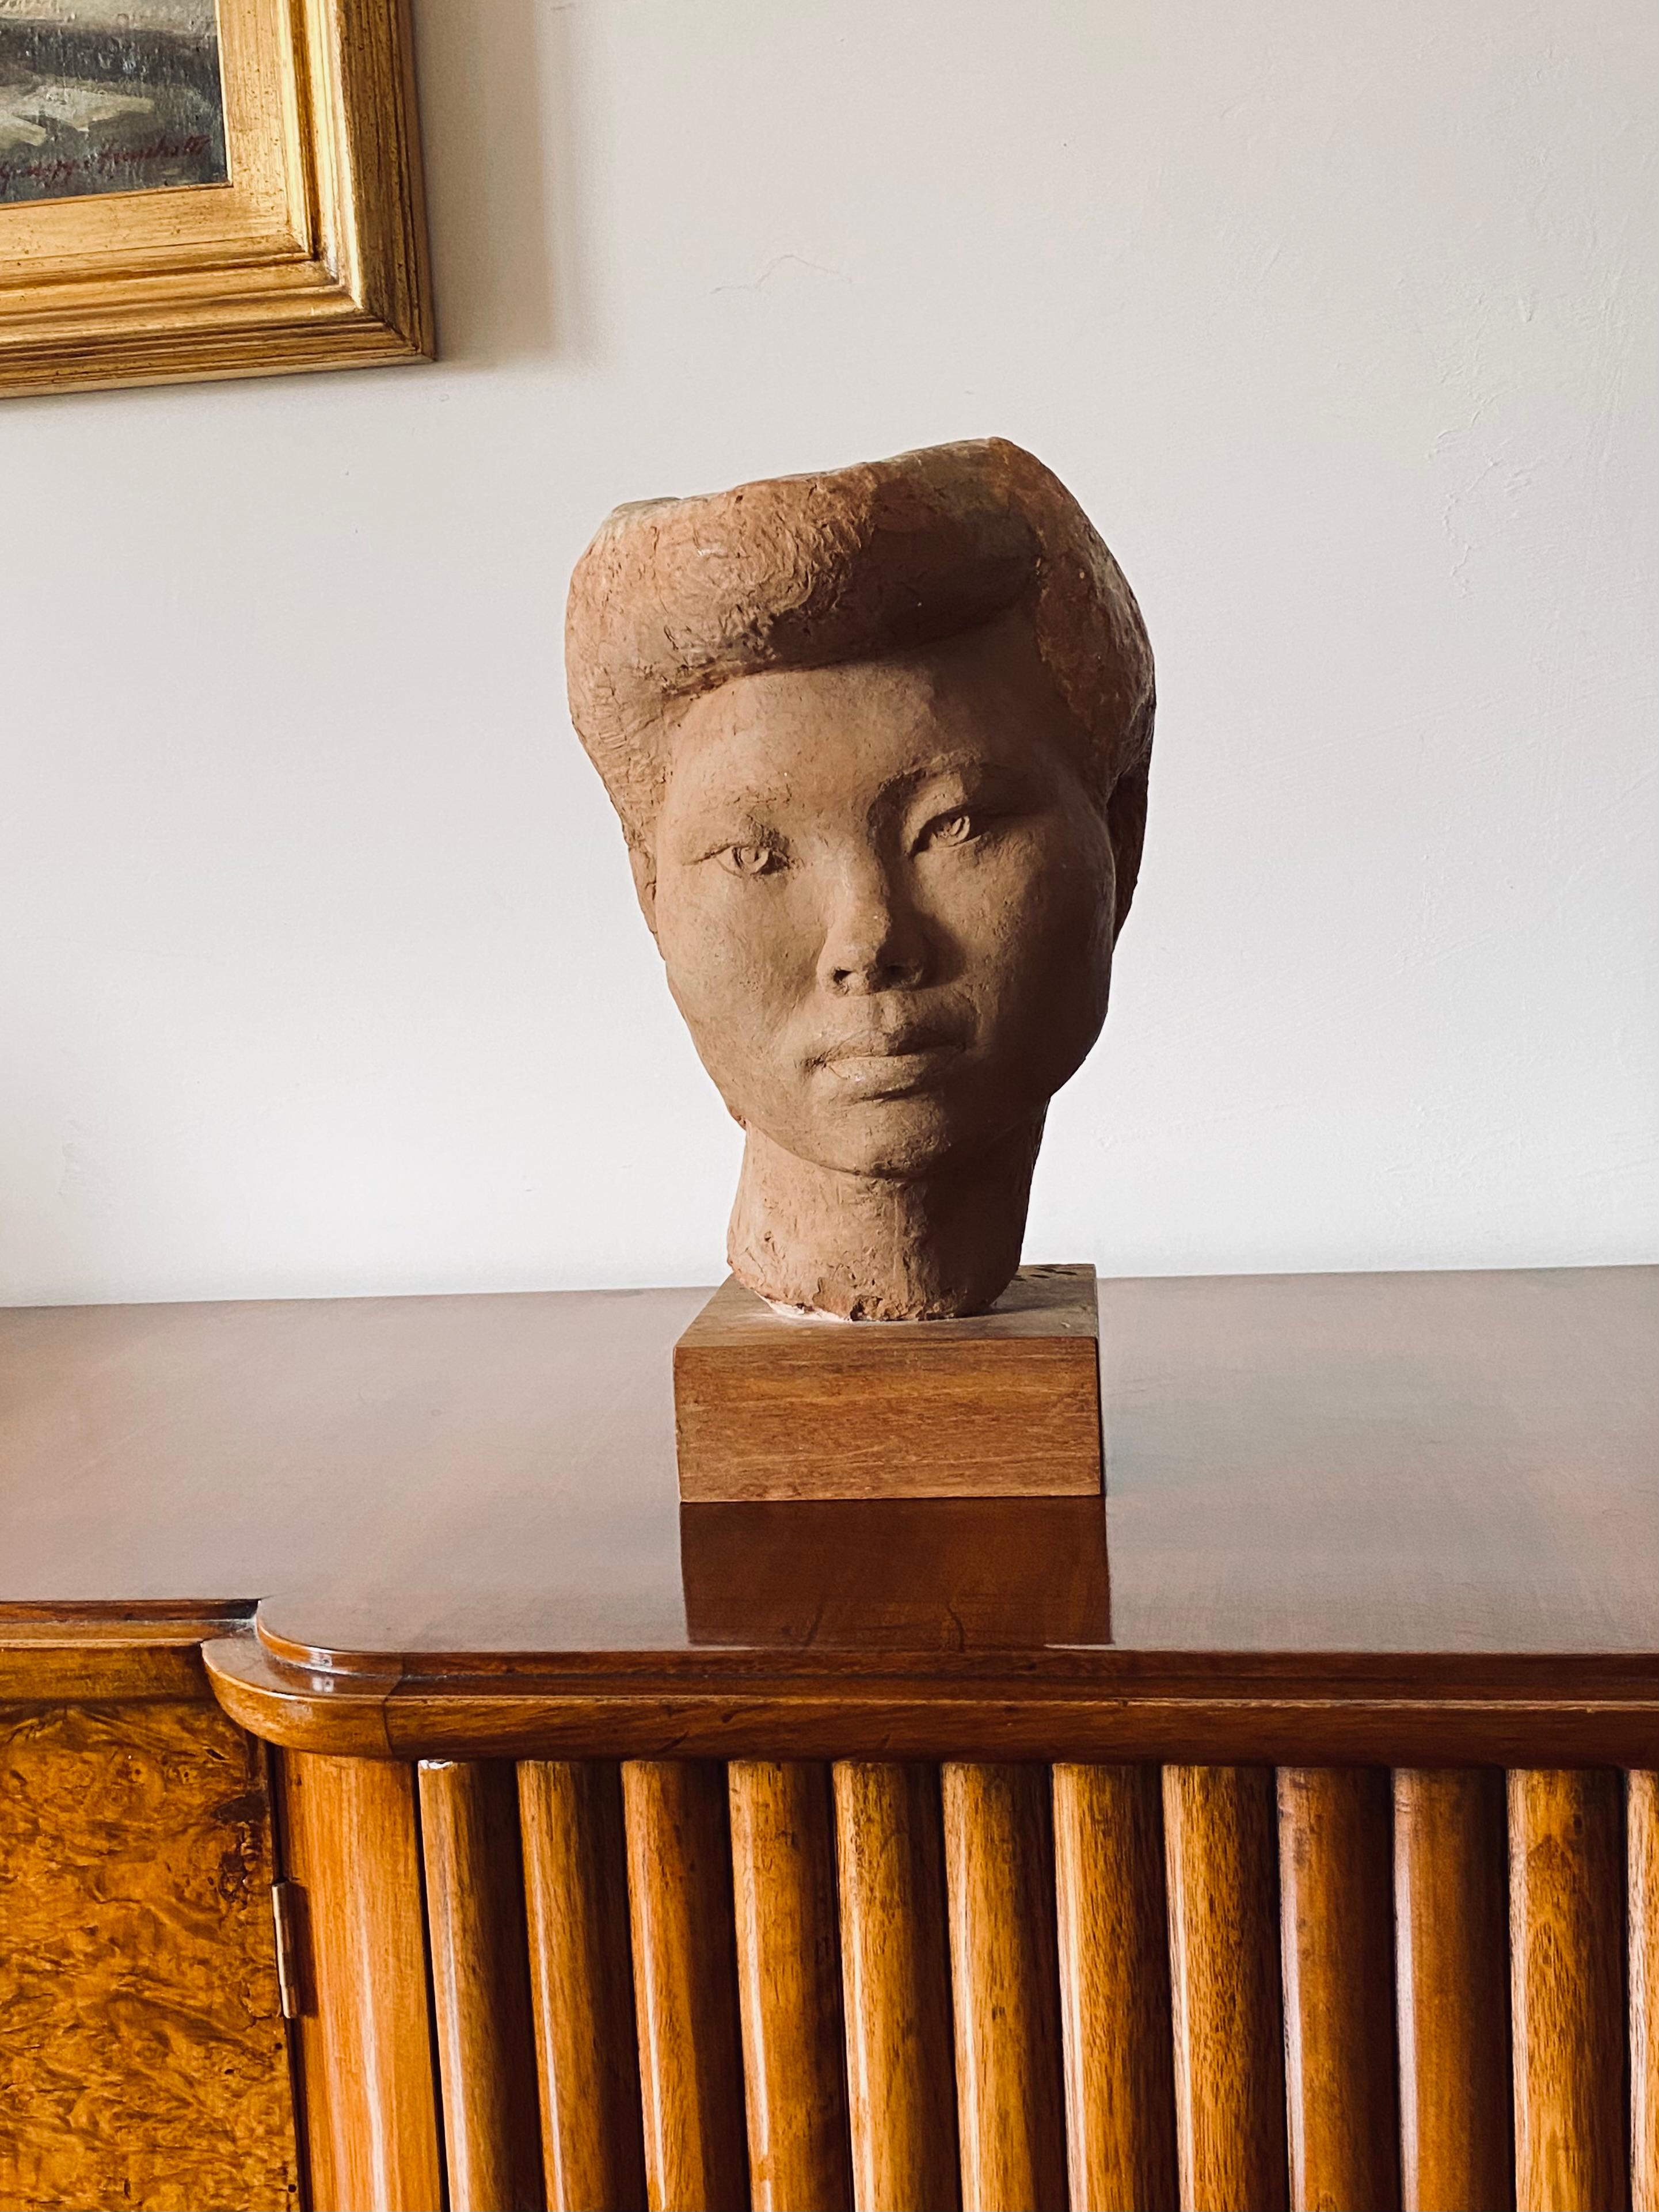 Terracotta japanese girl Akito head sculpture

Willy Gordon (1918 - 2023), France 1940s

Juvenile work. Signed on the base.

Measures: H 35 cm x 20 x 19 cm

Conditions: excellent consistent with age.